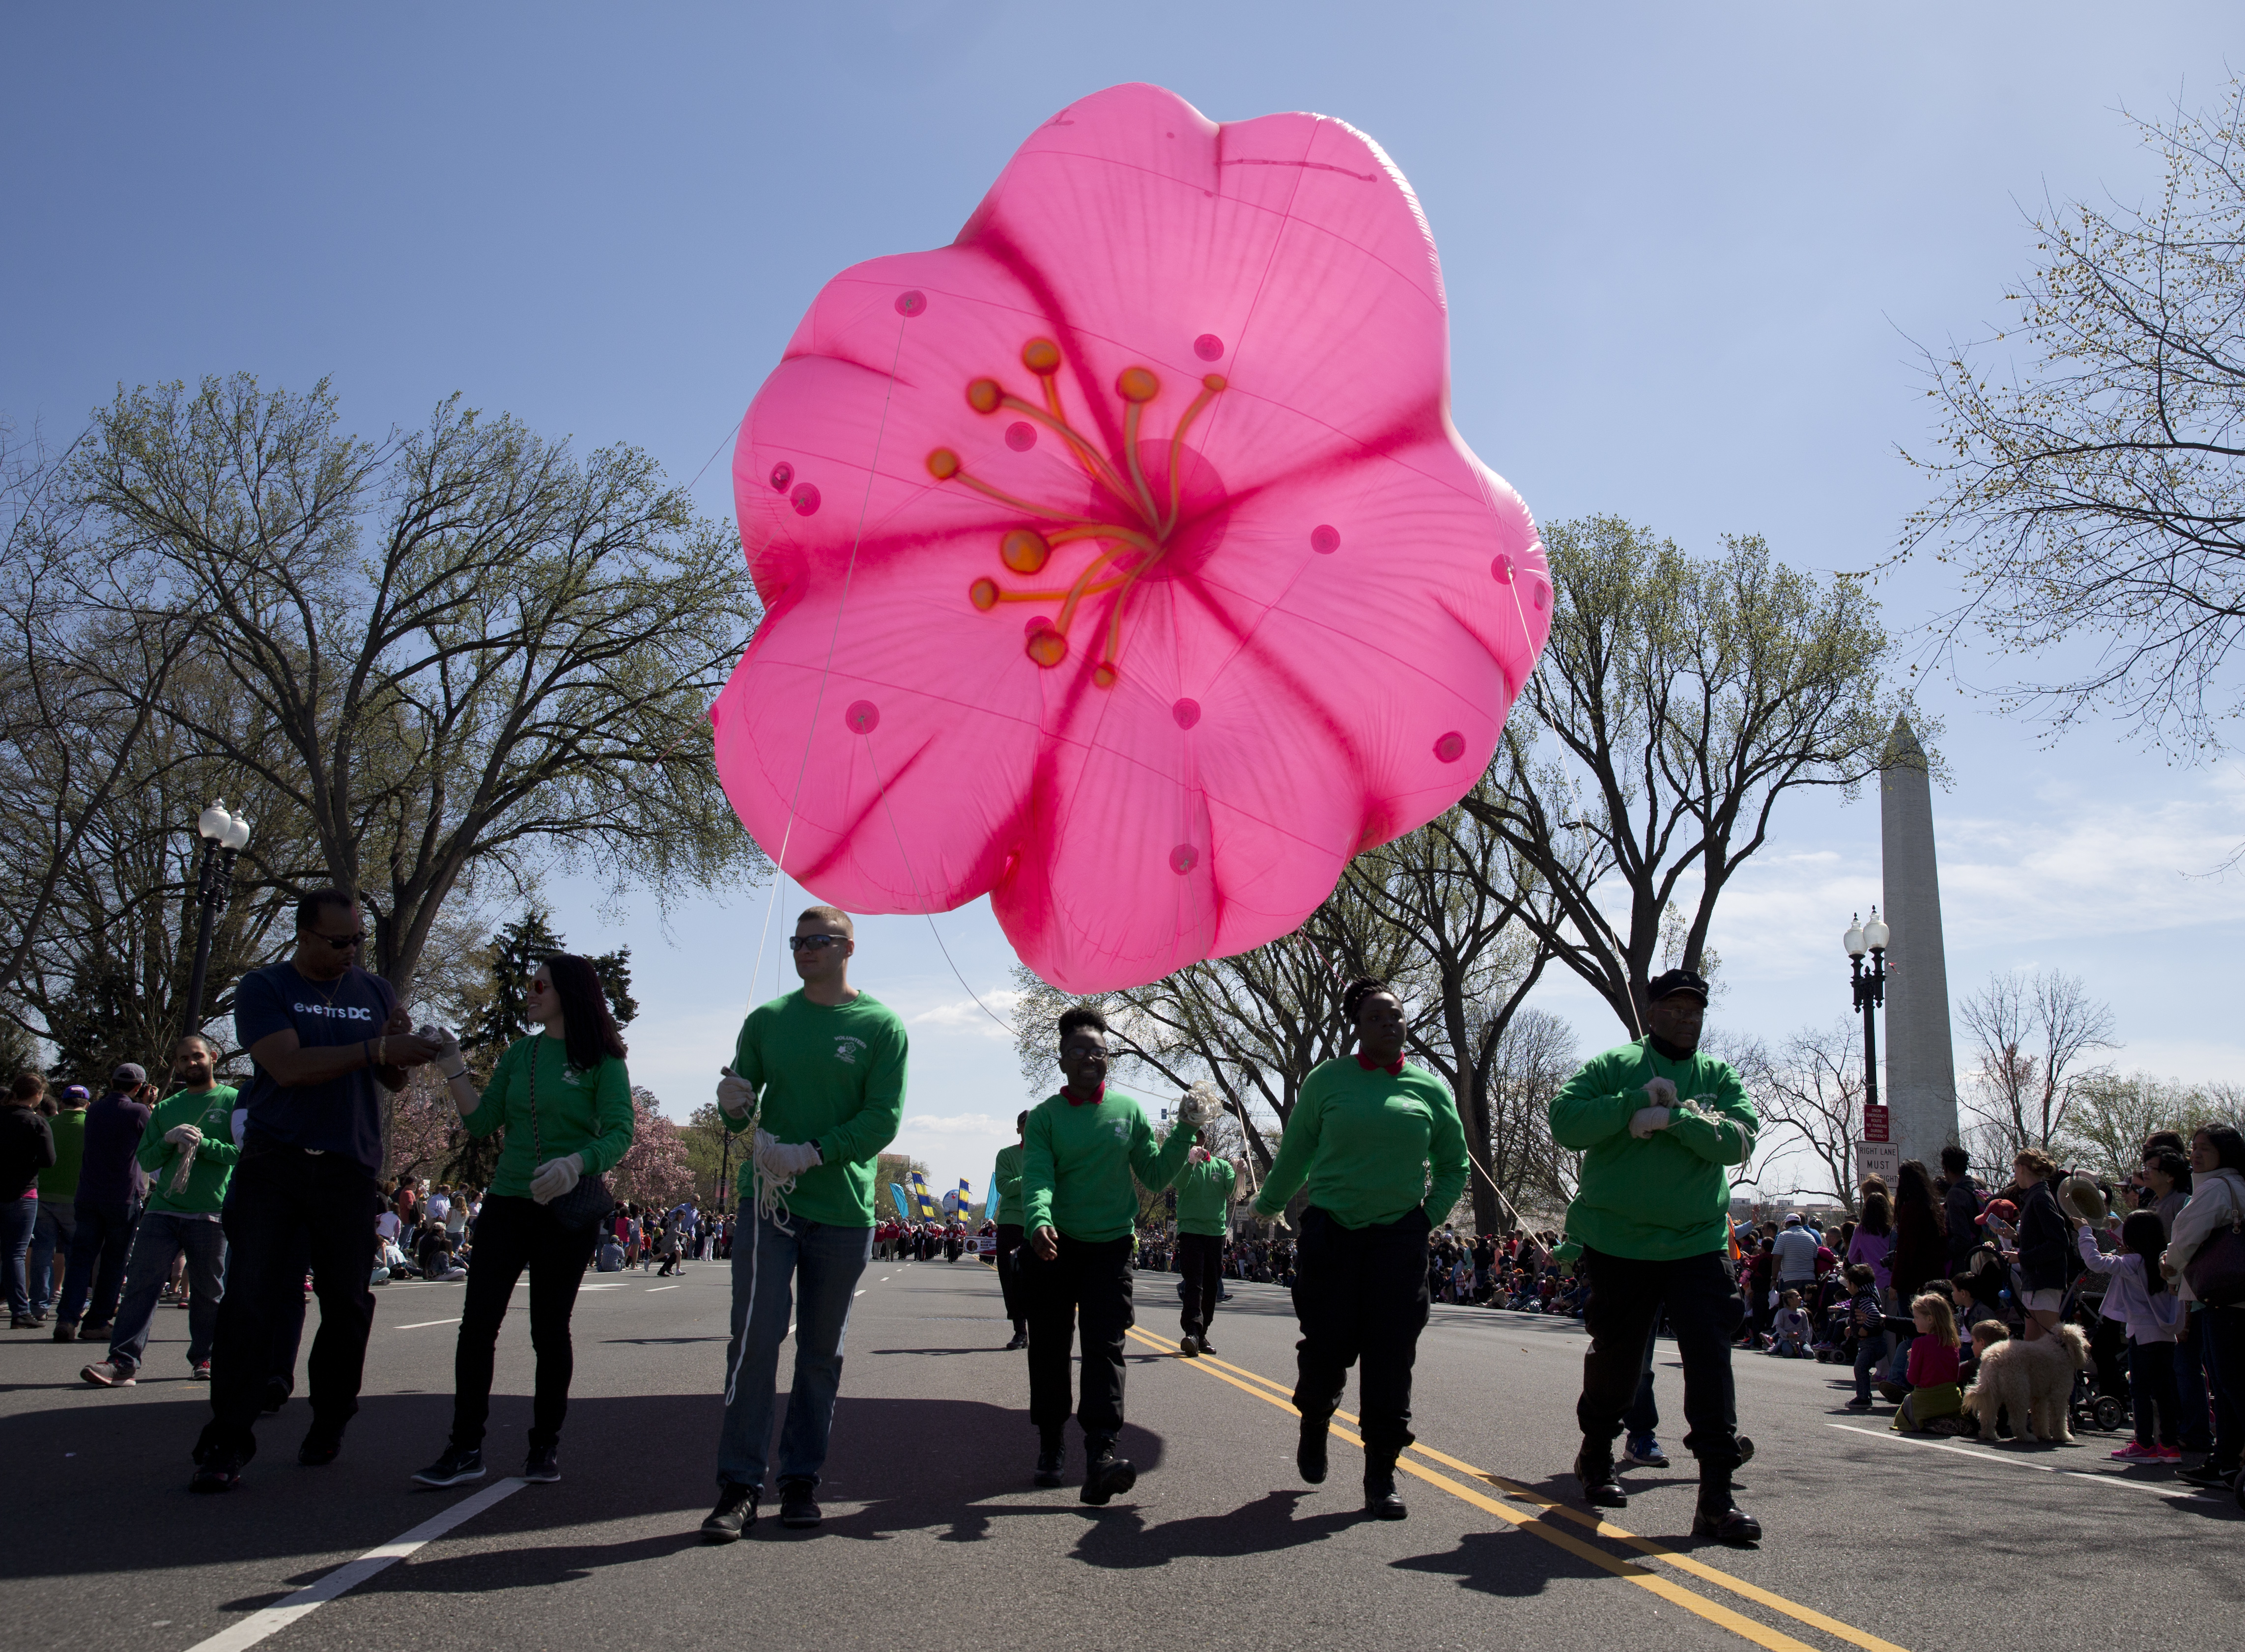 Can’t miss events: The 2016 National Cherry Blossom Festival